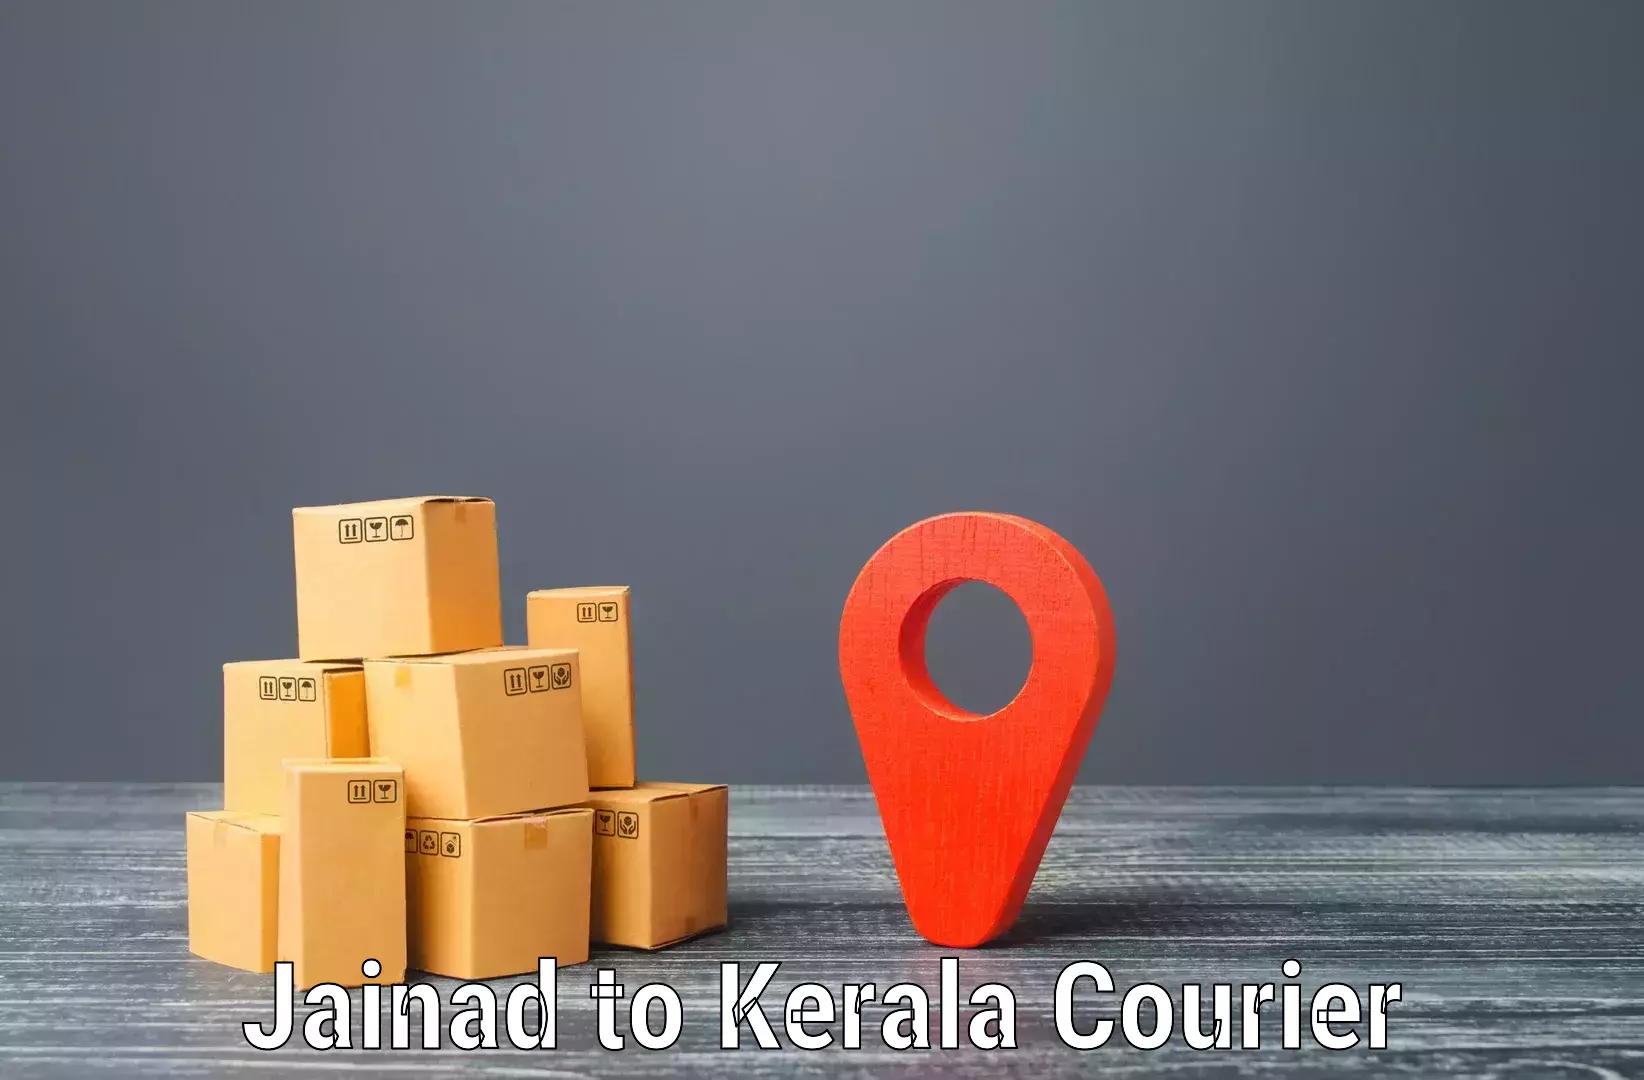 Specialized shipment handling in Jainad to Payyanur